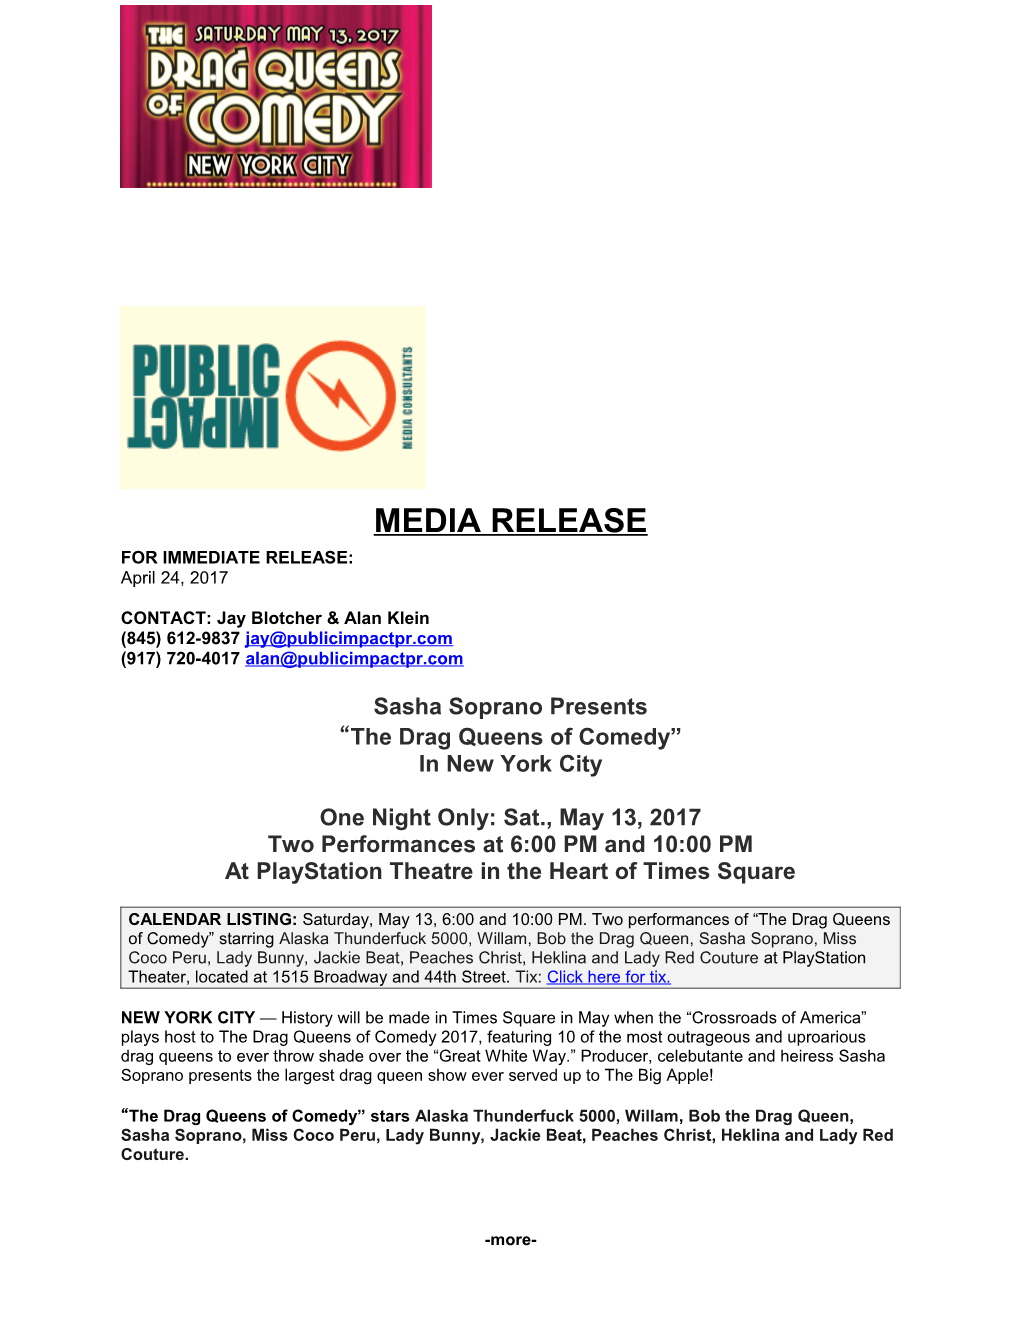 MEDIA RELEASE: the Drag Queens of Comedy Take Manhattan!